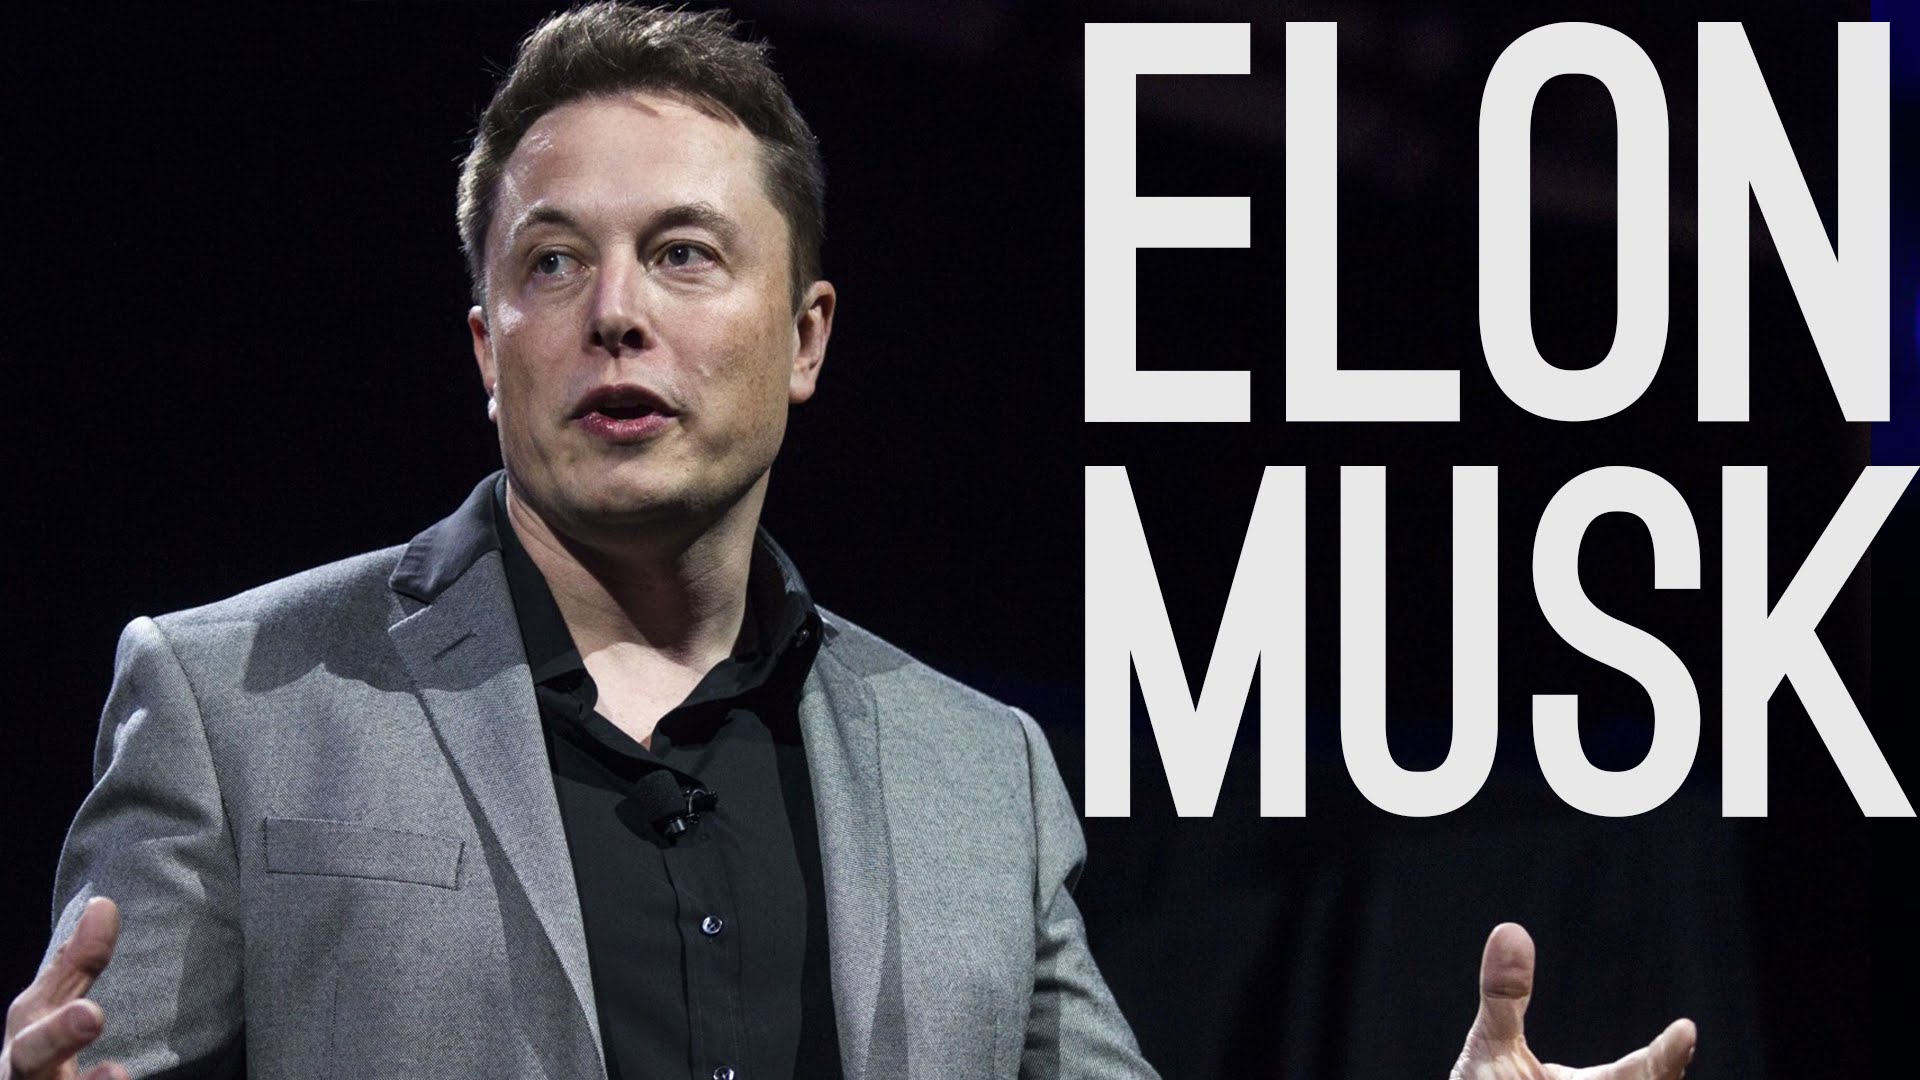 Elon Musk is now World’s Third Richest person of World after beating Mark Zuckerberg. Here are the list of Top 15 Richest person of World